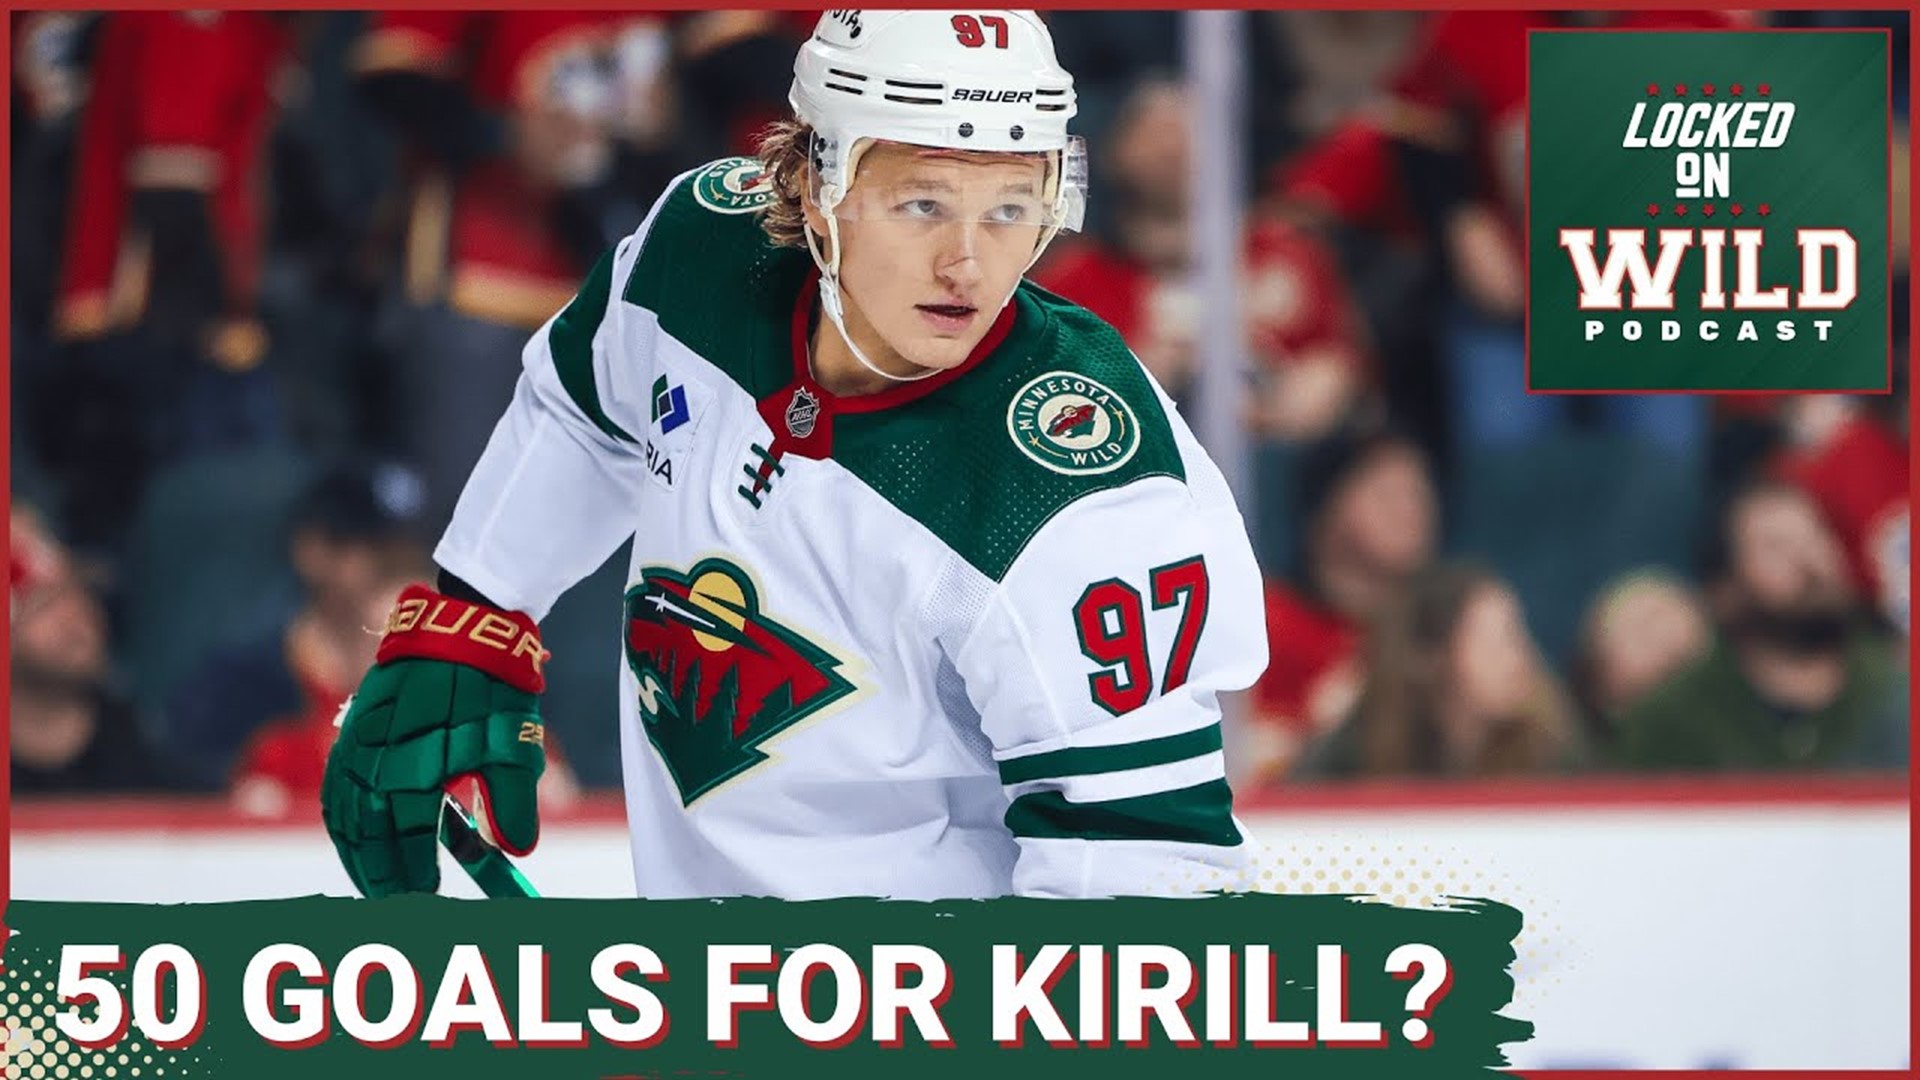 Can Kirill Kaprizov get to 50 goals by the end of the season?